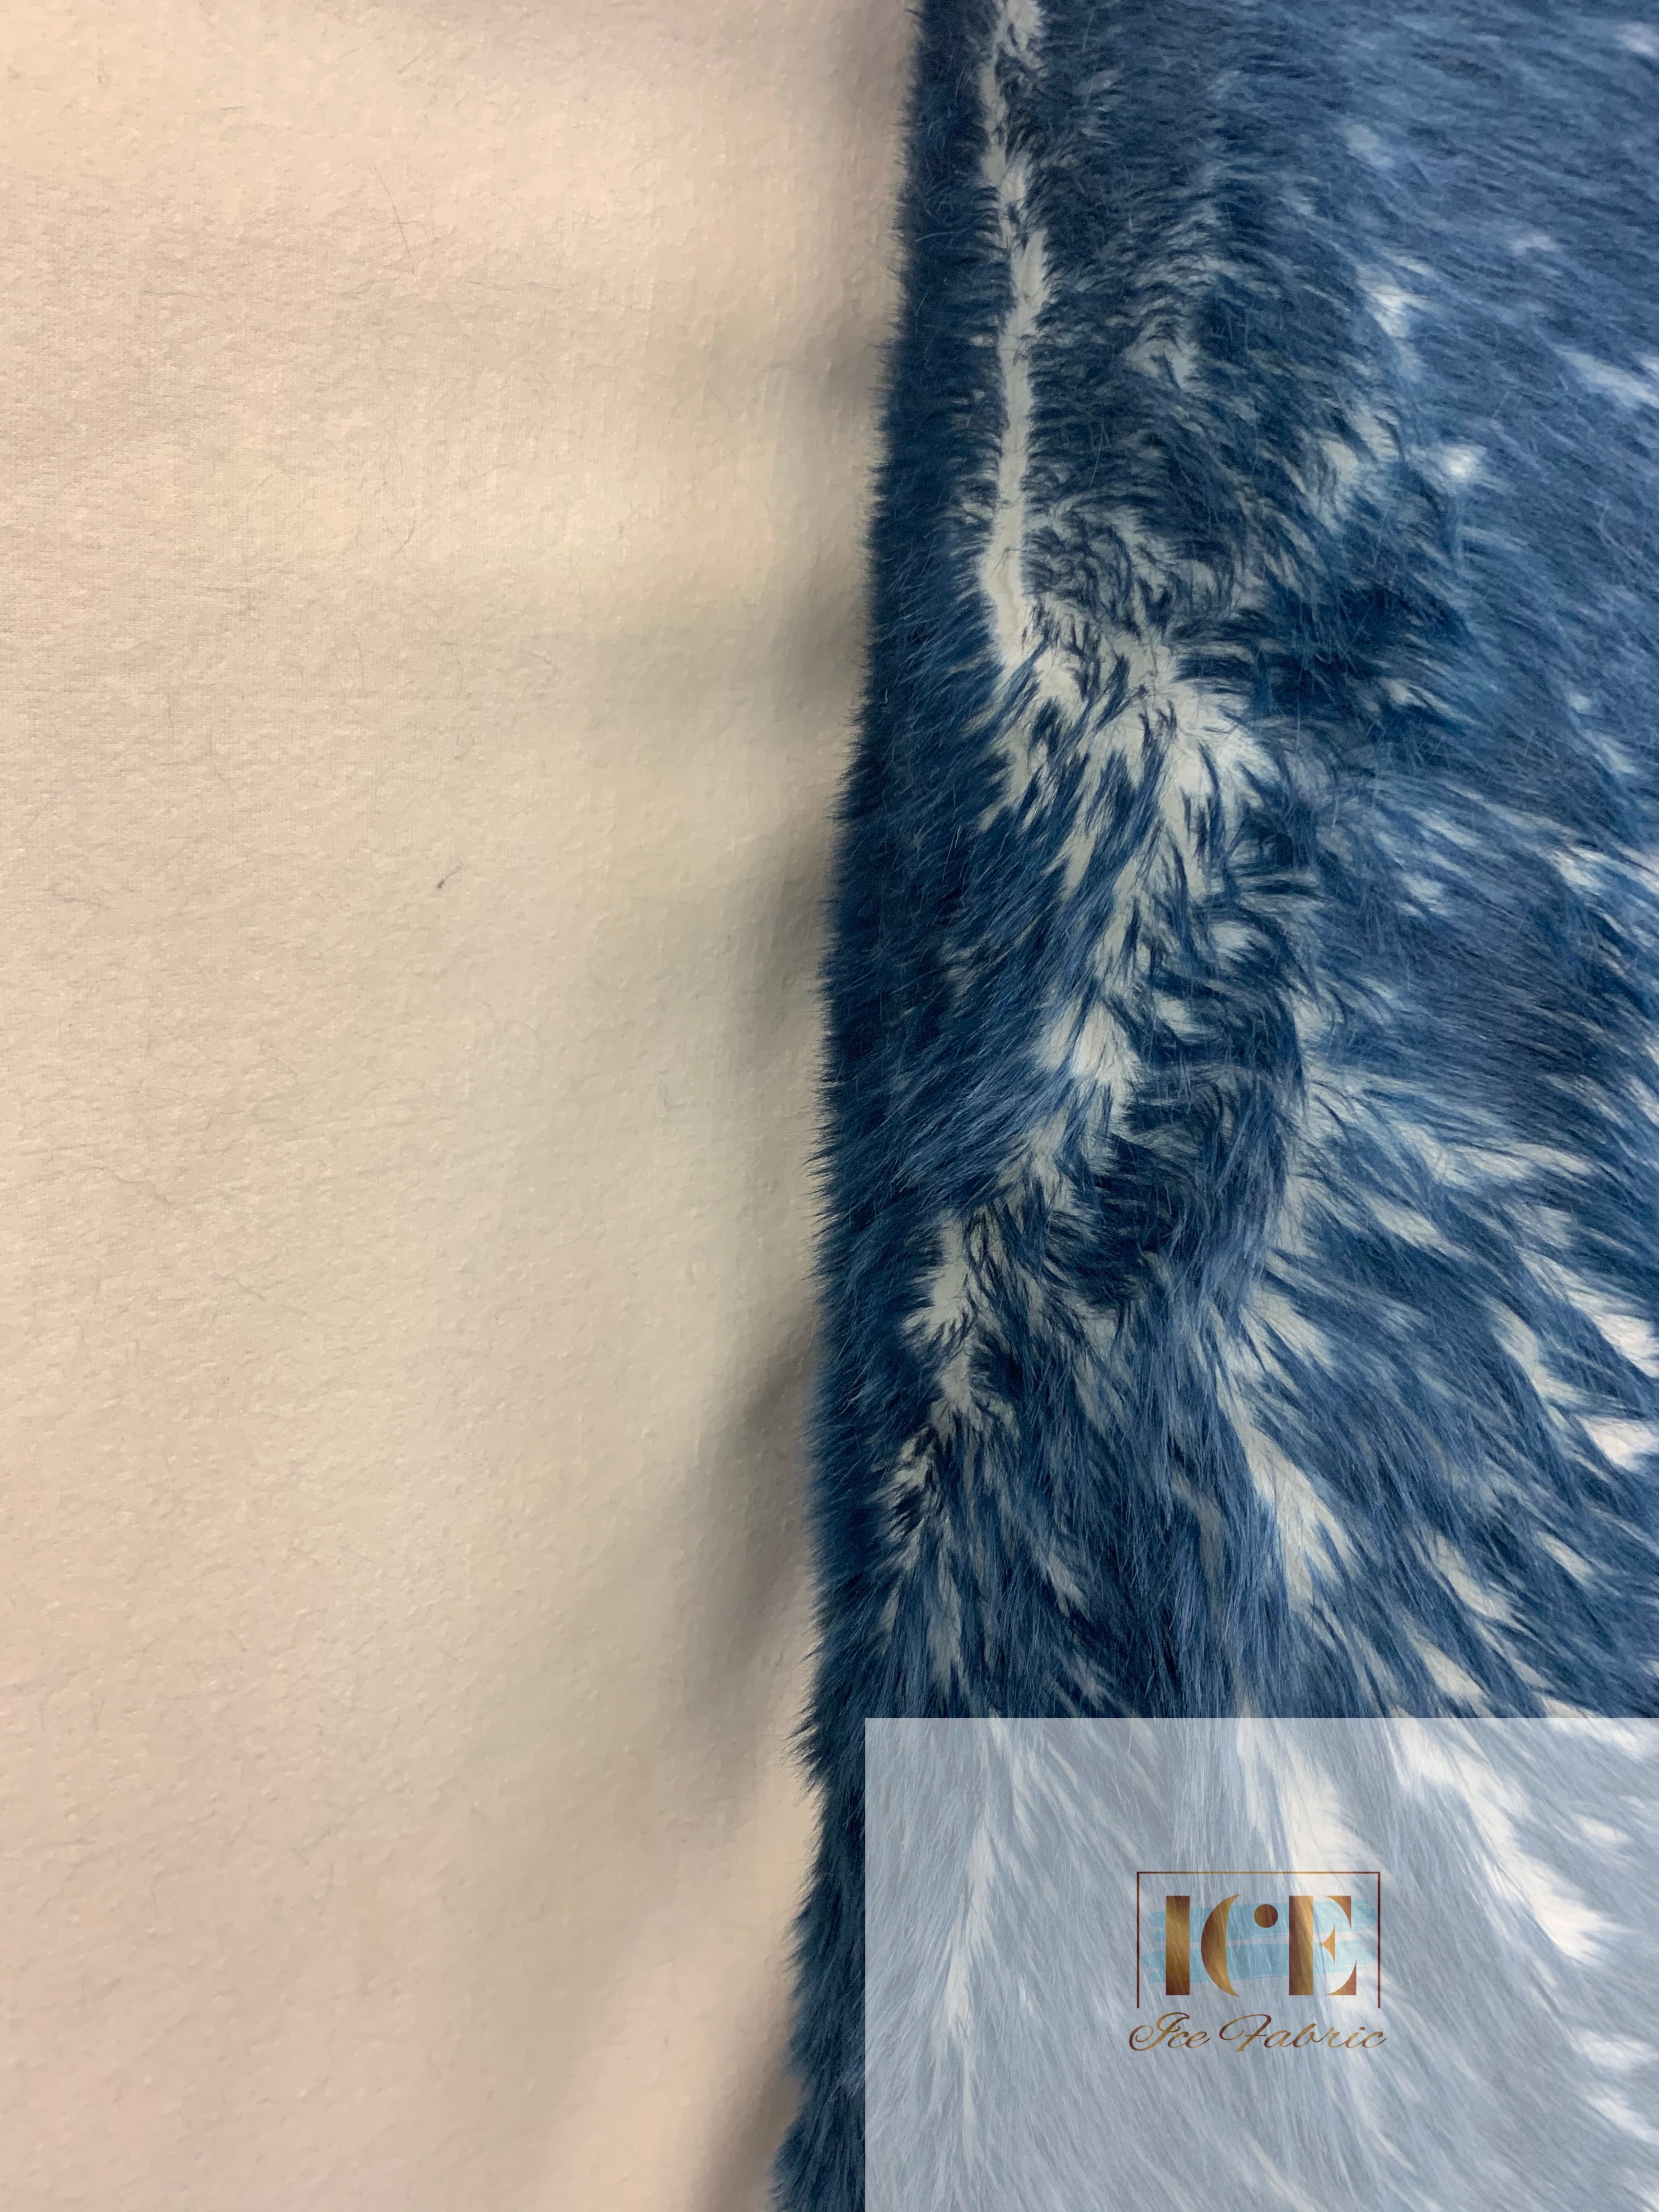 Canadian Fox 2 Tone Shaggy Long Pile Faux Fur Fabric For Blankets, Costumes, Bed SpreadICEFABRICICE FABRICSNavy BlueBy The Yard (60 inches Wide)Canadian Fox 2 Tone Shaggy Long Pile Faux Fur Fabric For Blankets, Costumes, Bed Spread ICEFABRIC Navy Blue